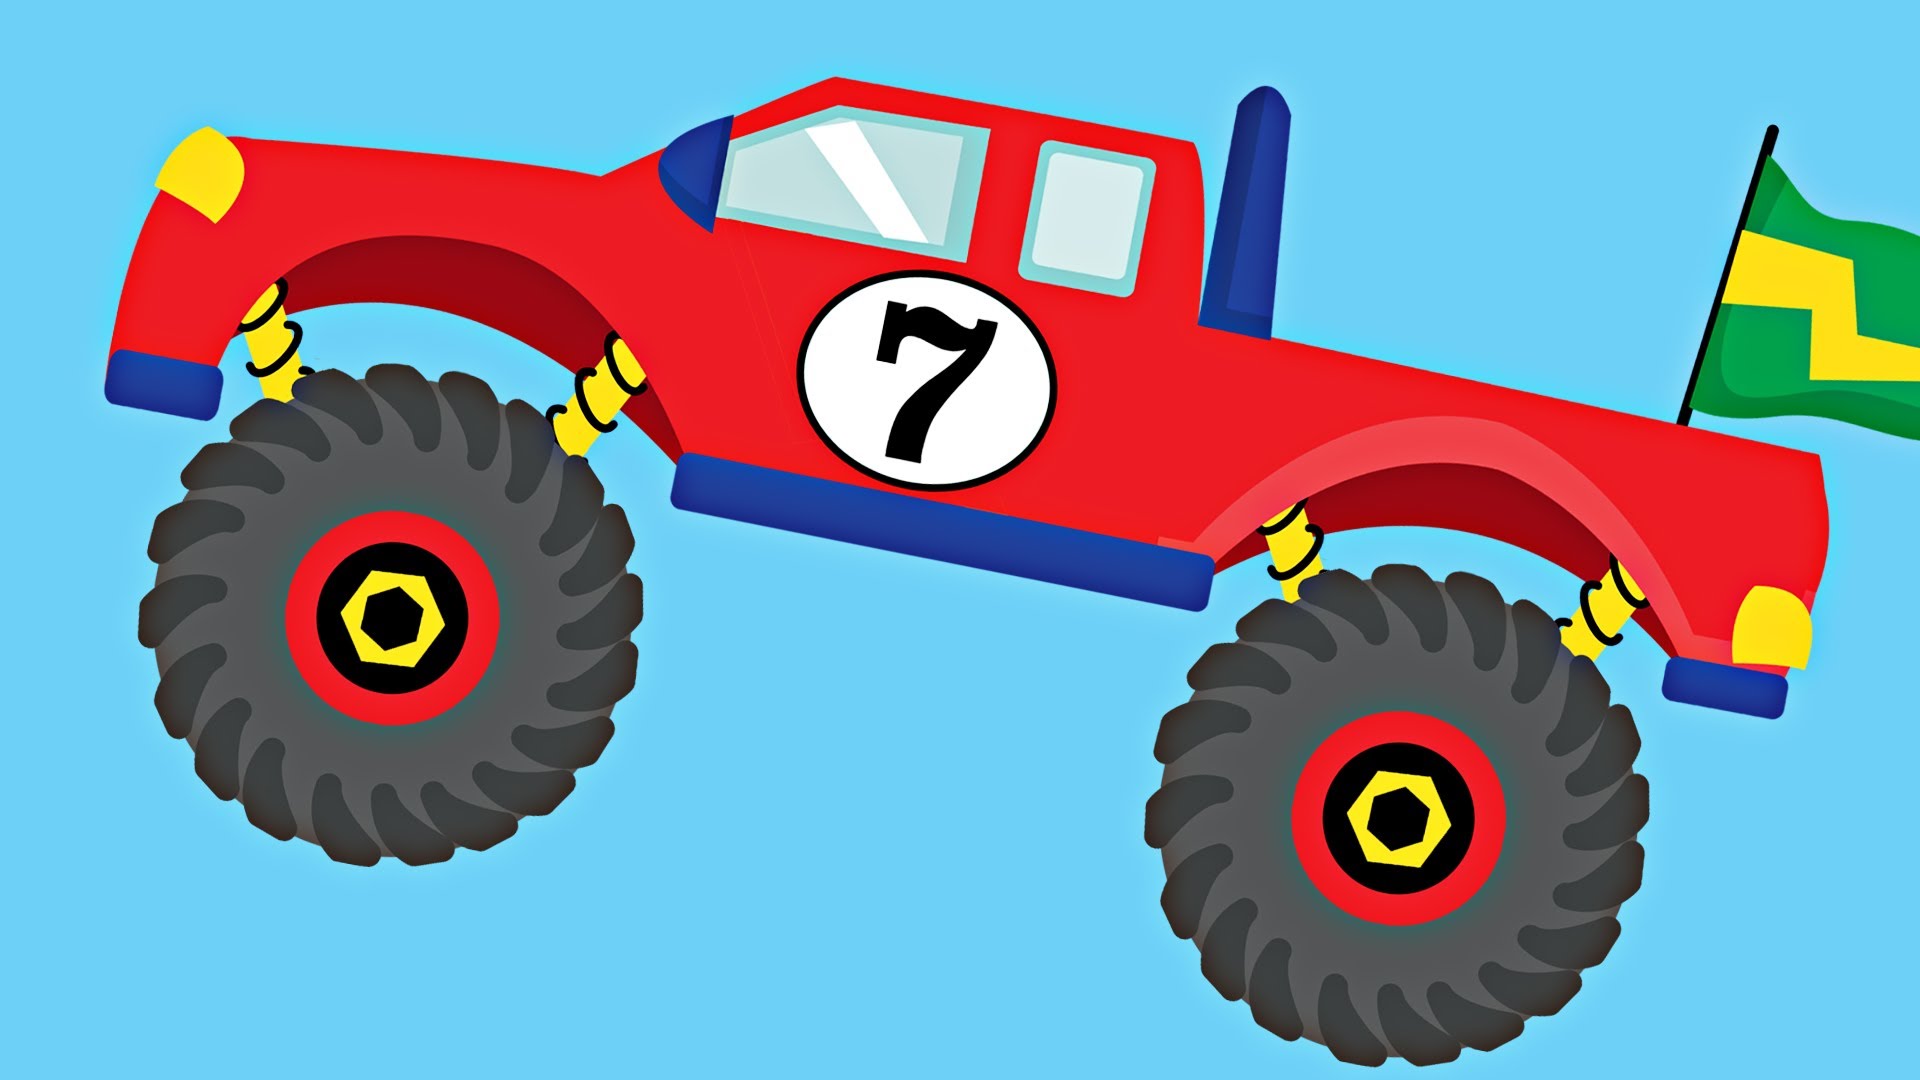 Cartoon Monster Truck High-Res Vector Graphic - Getty Images